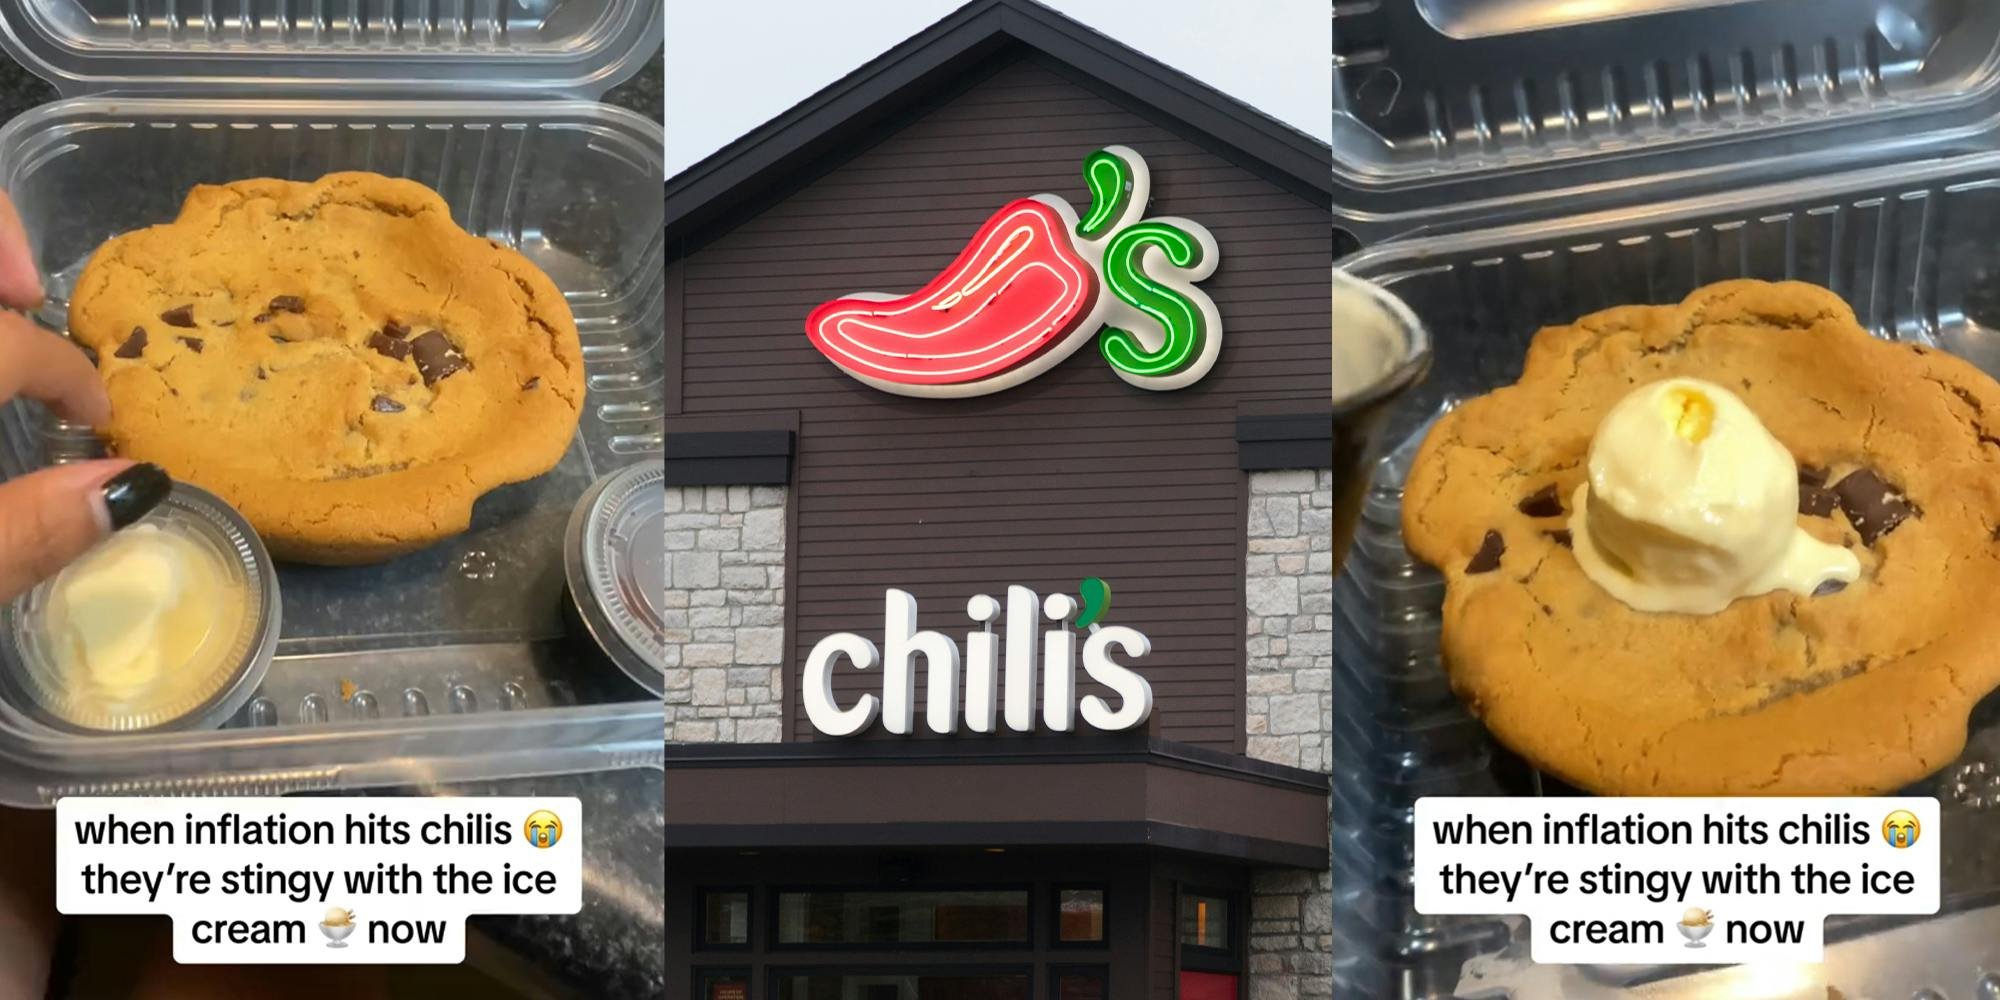 'Thought they gave me a side of butter': Chili's customer mistakes ice cream for side of butter in cookie skillet order after restaurant skimps